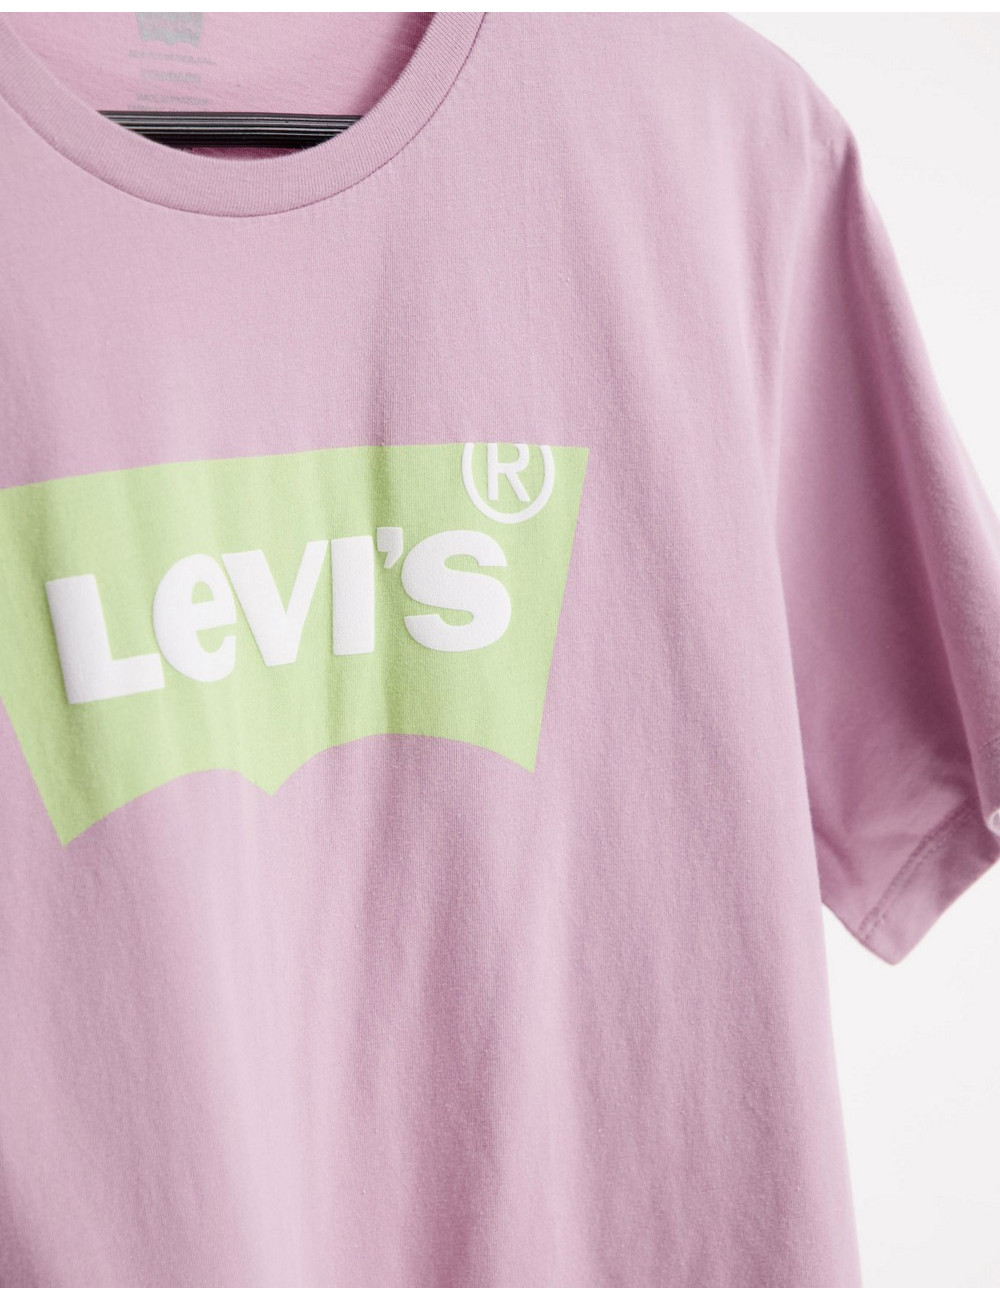 Levi's t-shirt in lilac...